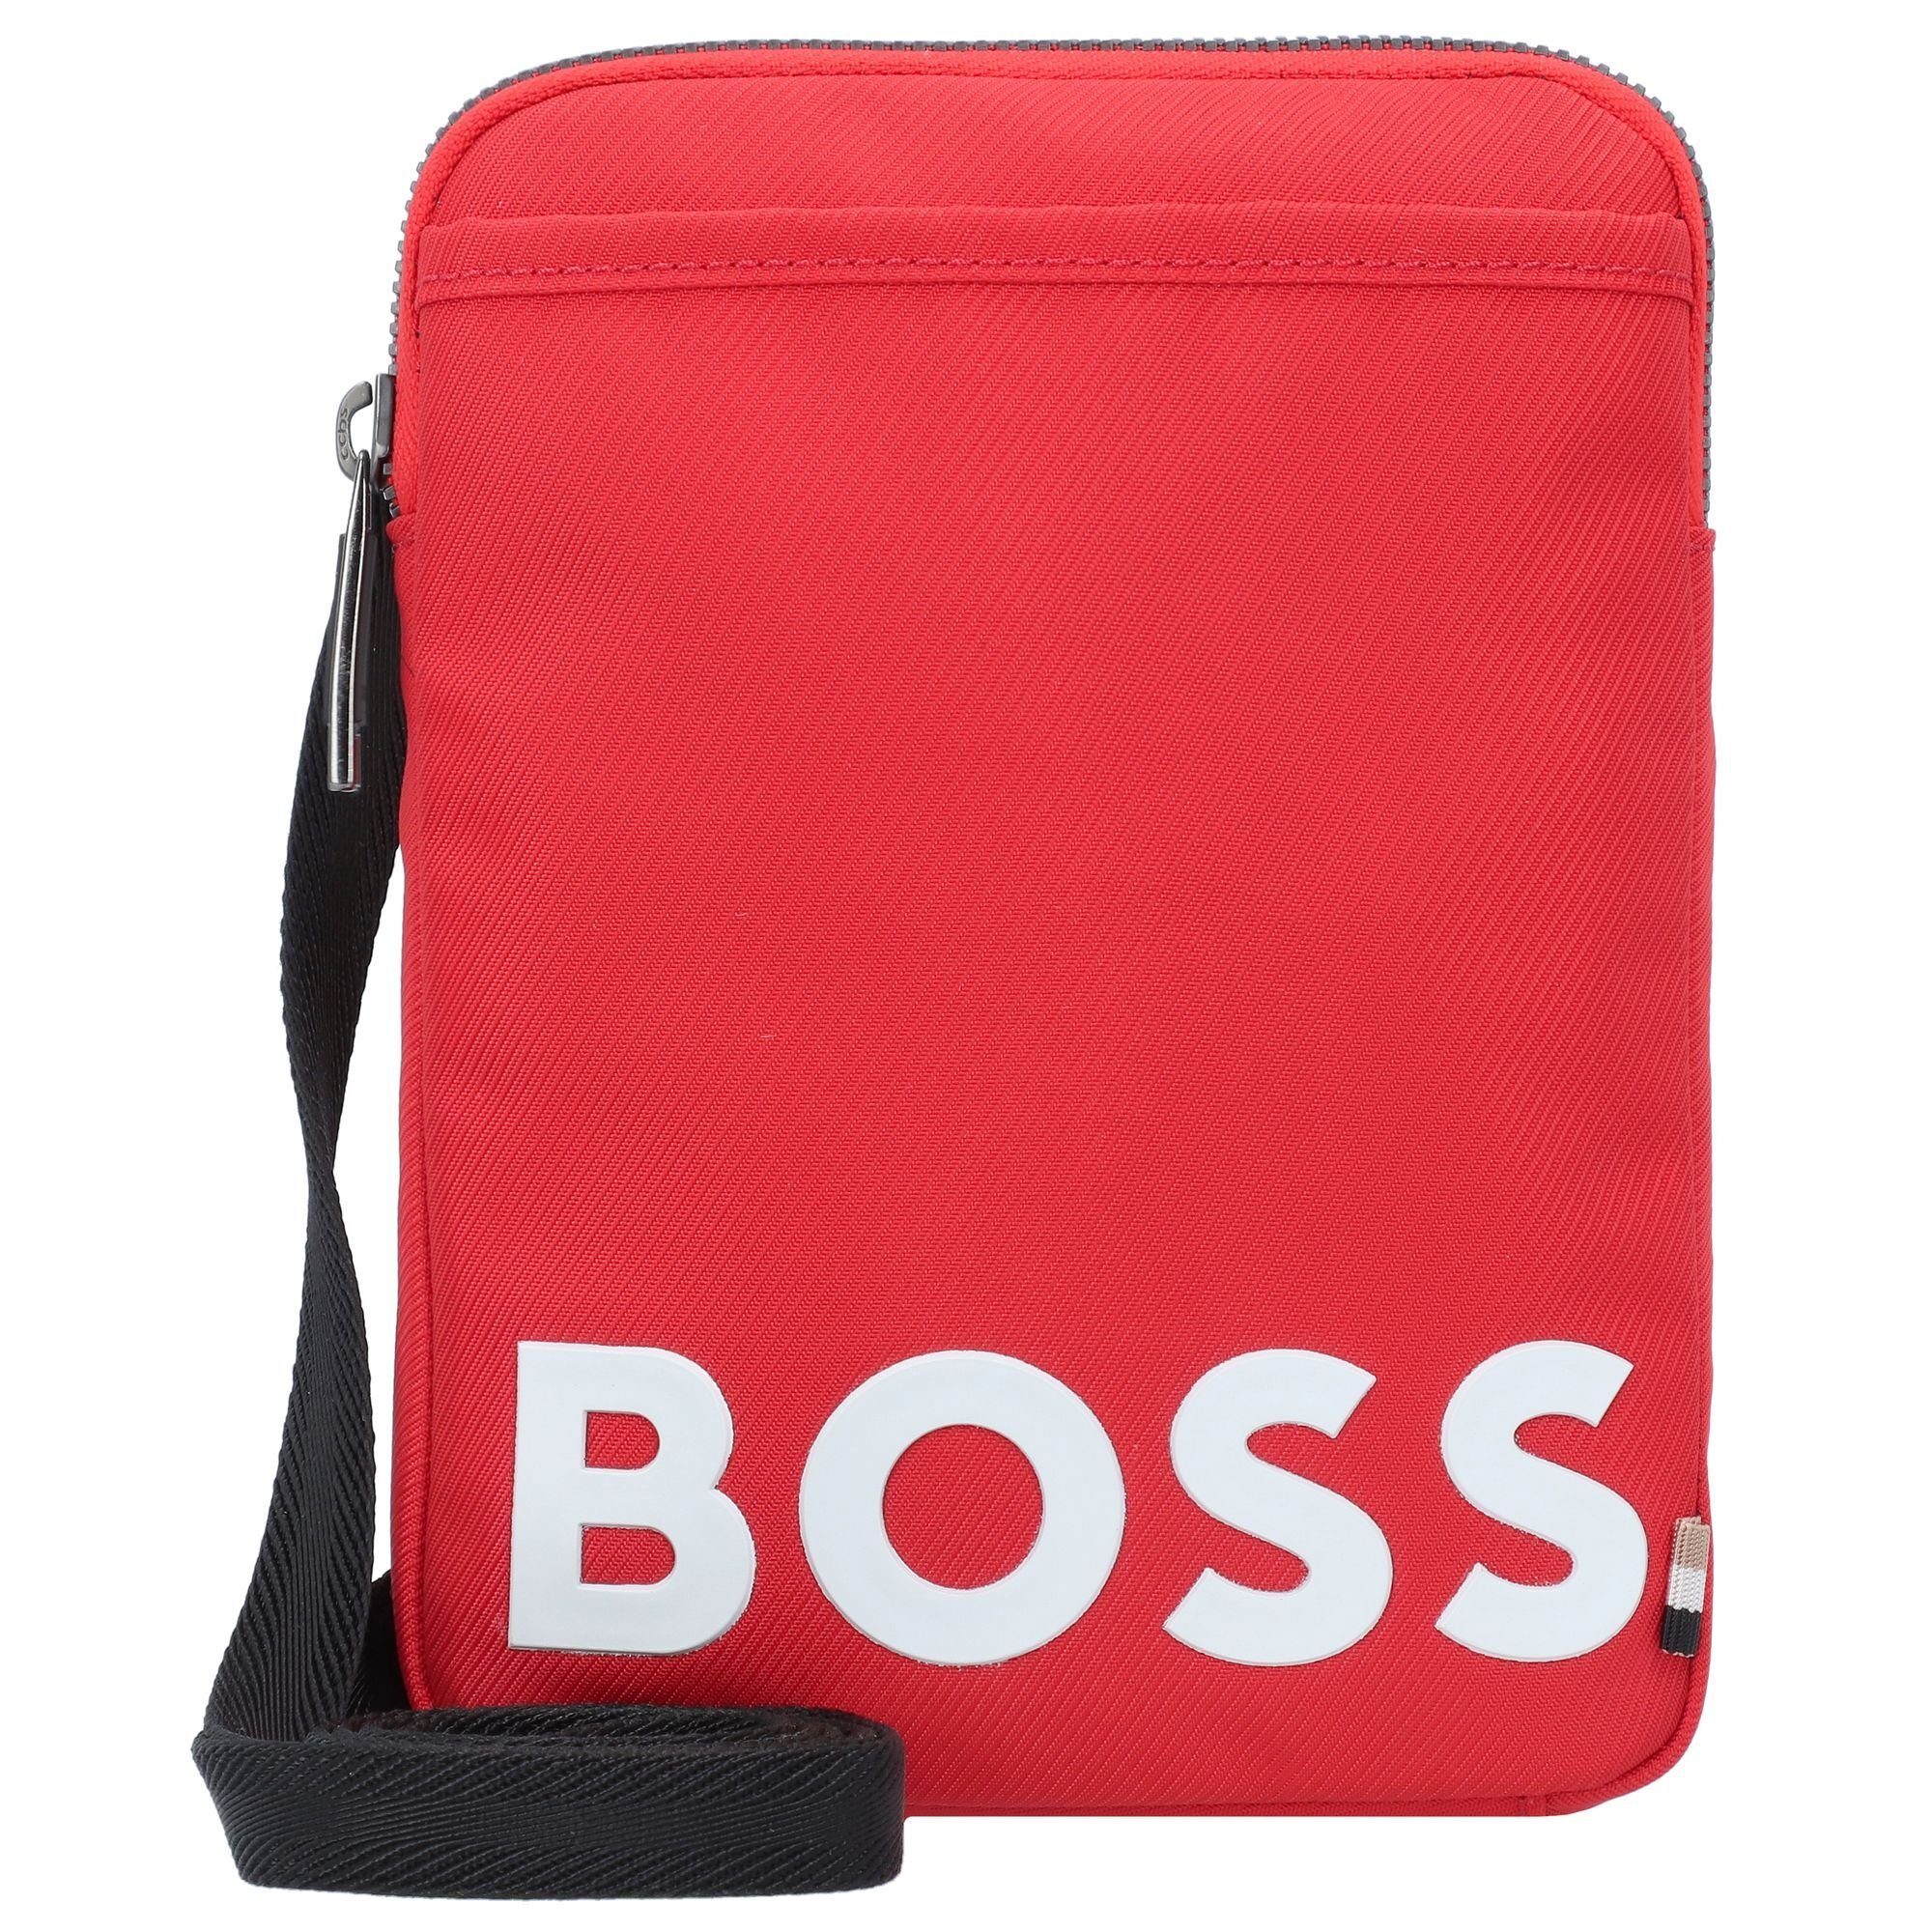 BOSS Smartphone-Hülle Catch 2.0, Polyester bright red-628